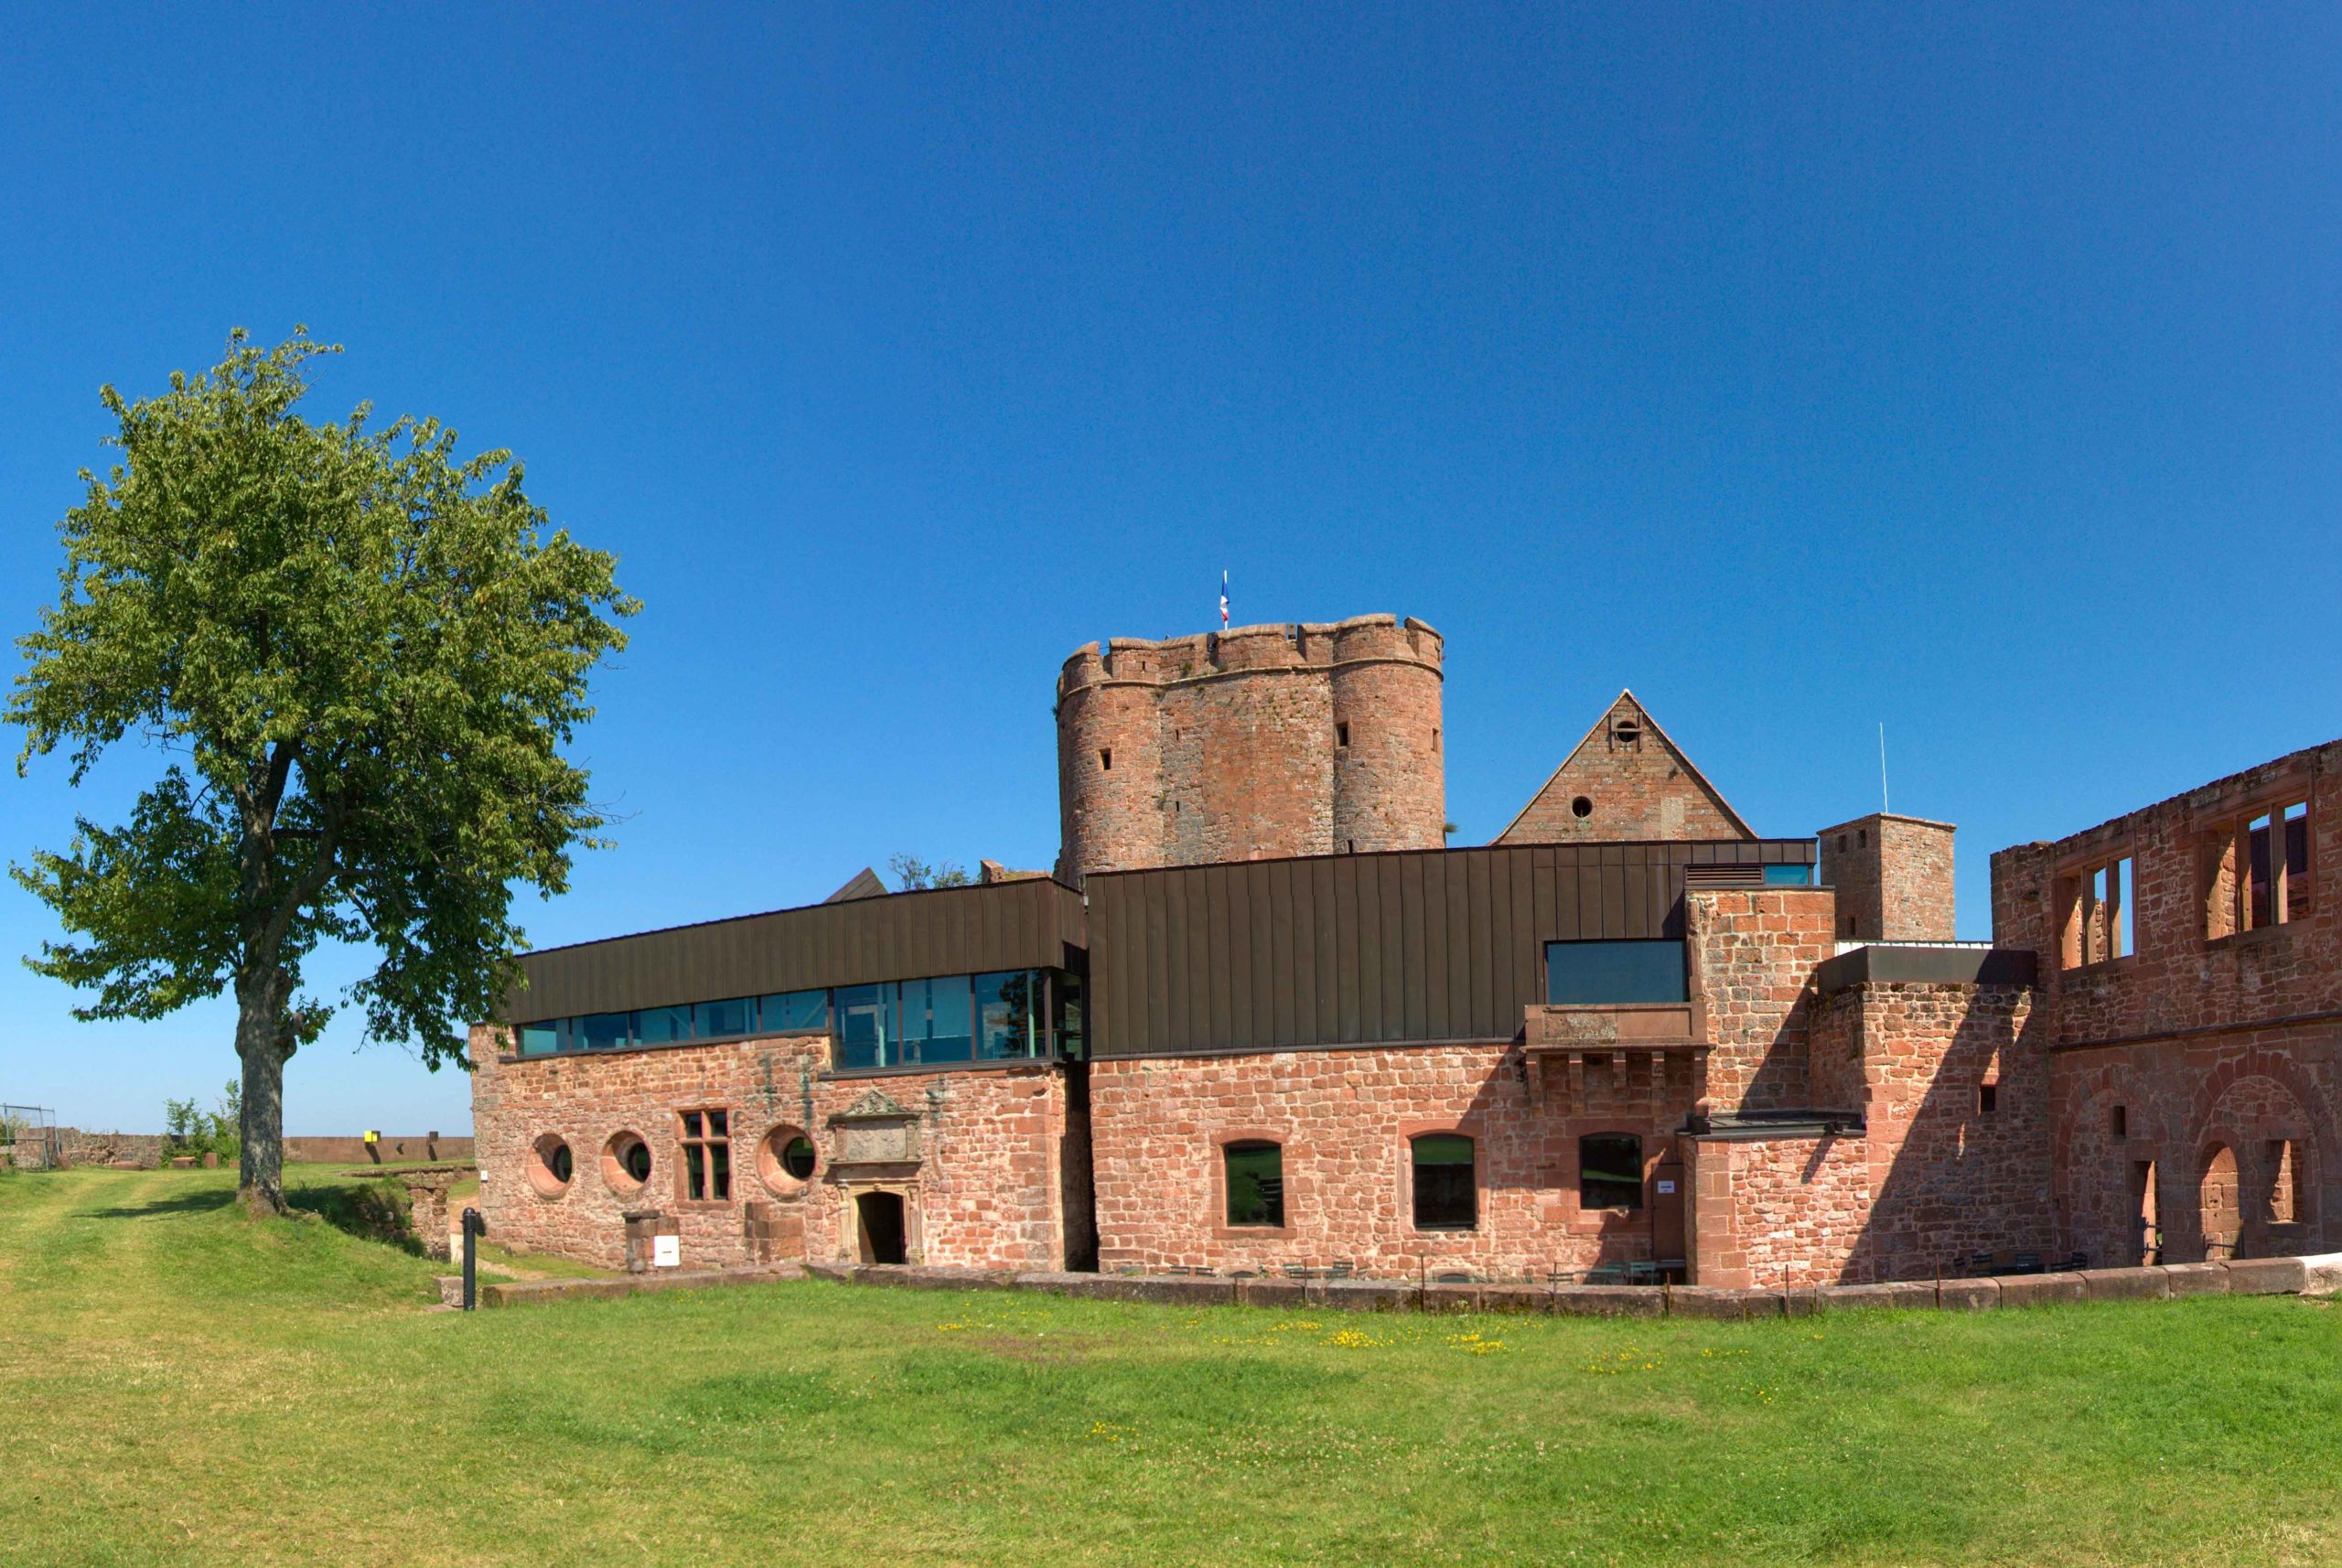 Châteaux des Vosges du Nord - Lichtenberg © Ambroise1415 - licence [CC BY-SA 4.0] from Wikimedia Commons